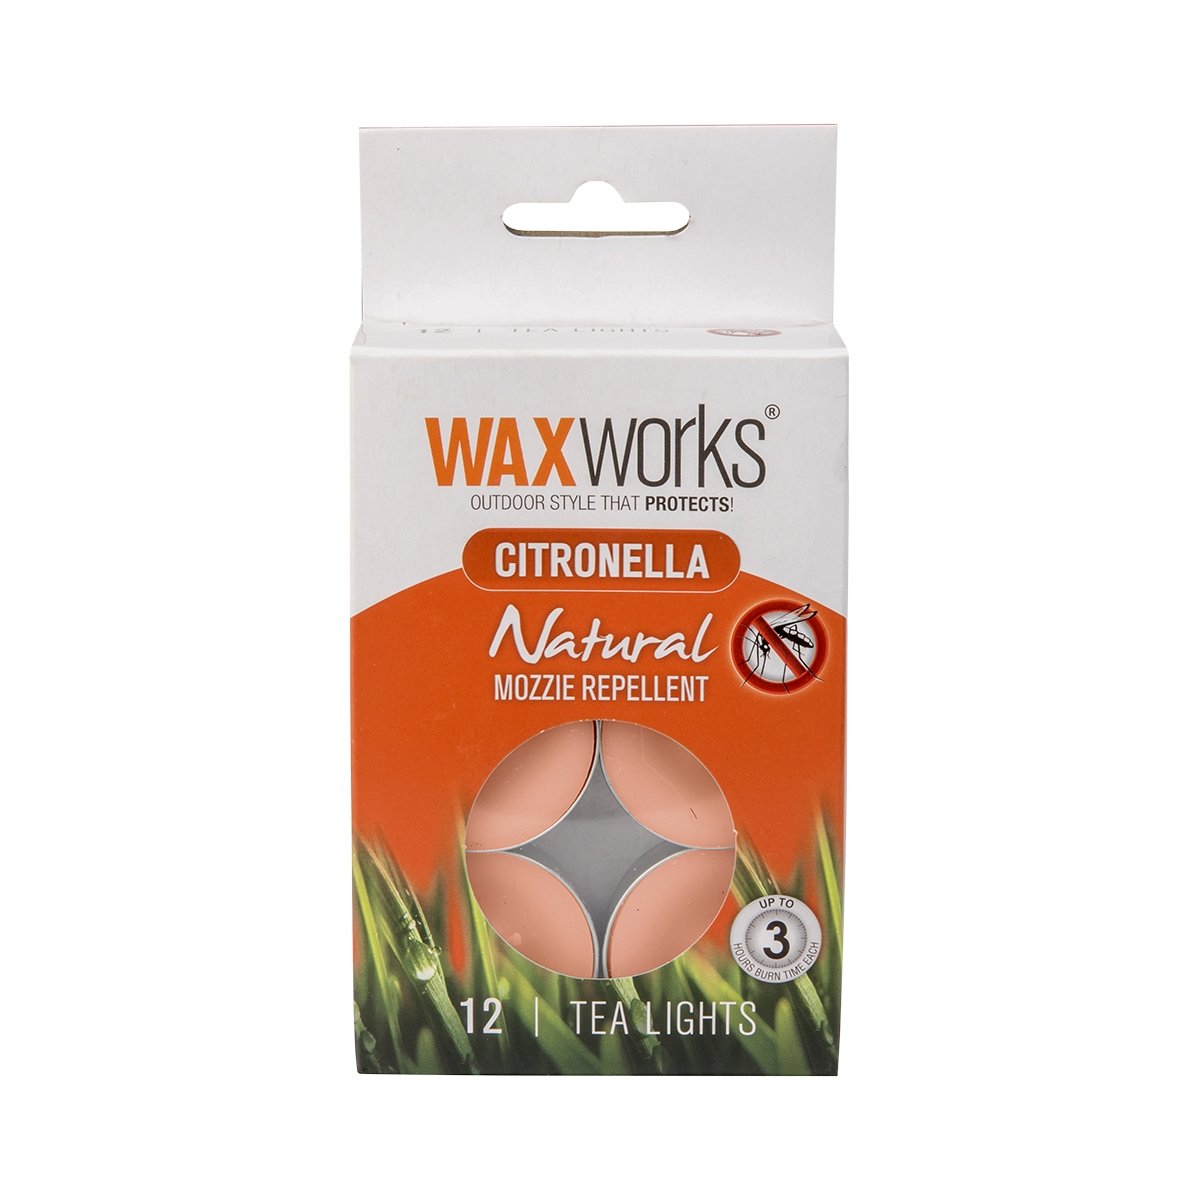 WAXworks Citronella Tea Light Candle 37mmX13mm (12 Pieces Included) WW916 - Double Bay Hardware